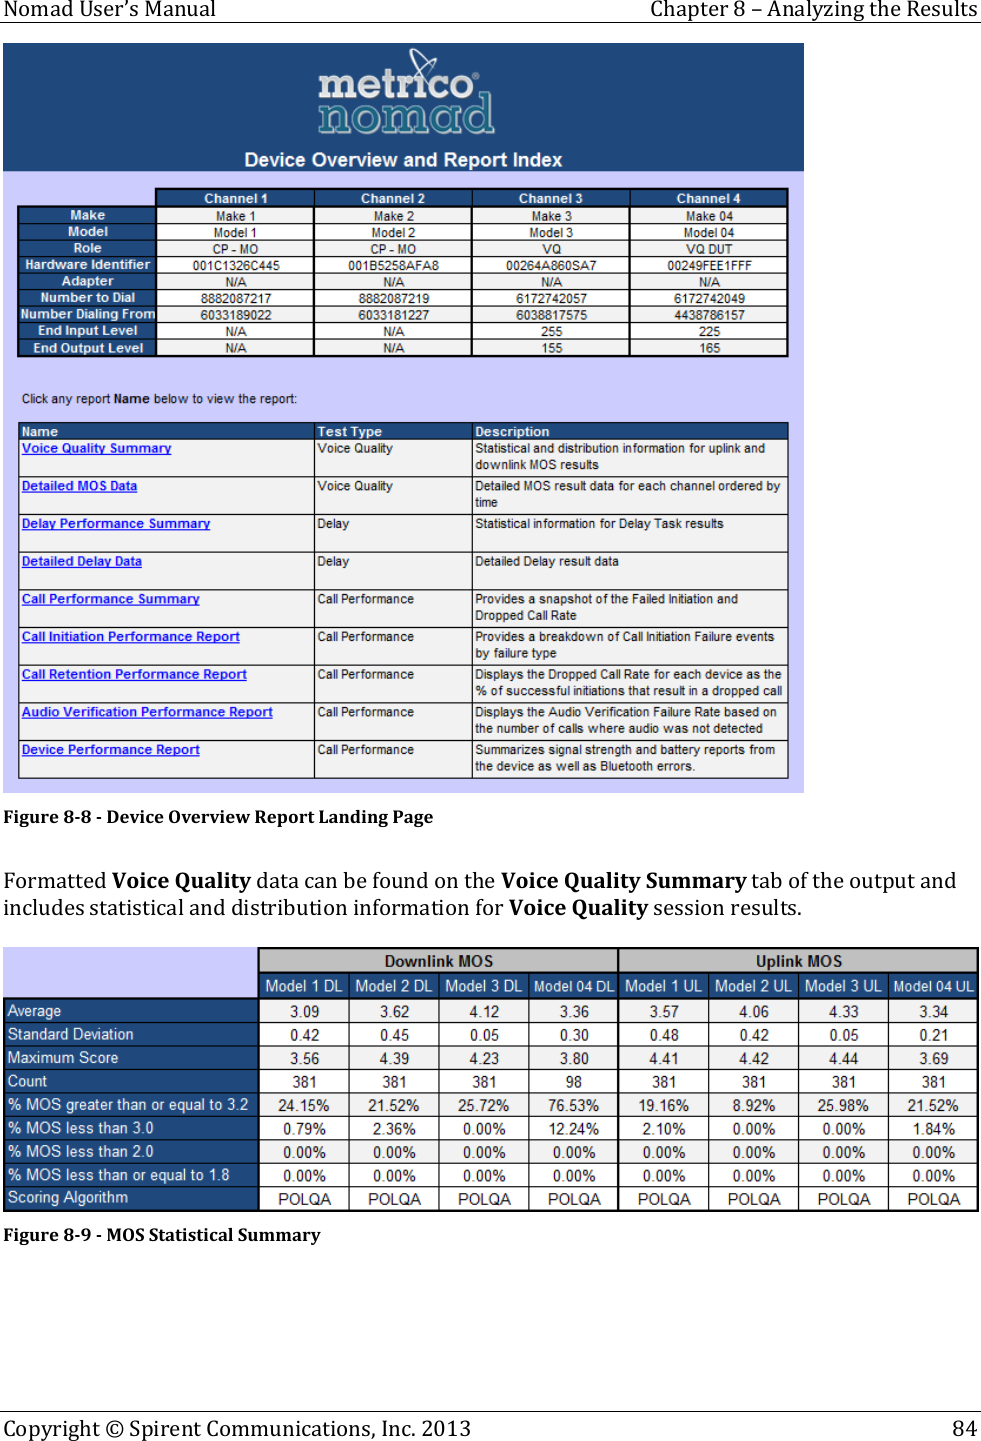  Nomad User’s Manual  Chapter 8 – Analyzing the Results Copyright © Spirent Communications, Inc. 2013    84   Figure 8-8 - Device Overview Report Landing Page  Formatted Voice Quality data can be found on the Voice Quality Summary tab of the output and includes statistical and distribution information for Voice Quality session results.   Figure 8-9 - MOS Statistical Summary  